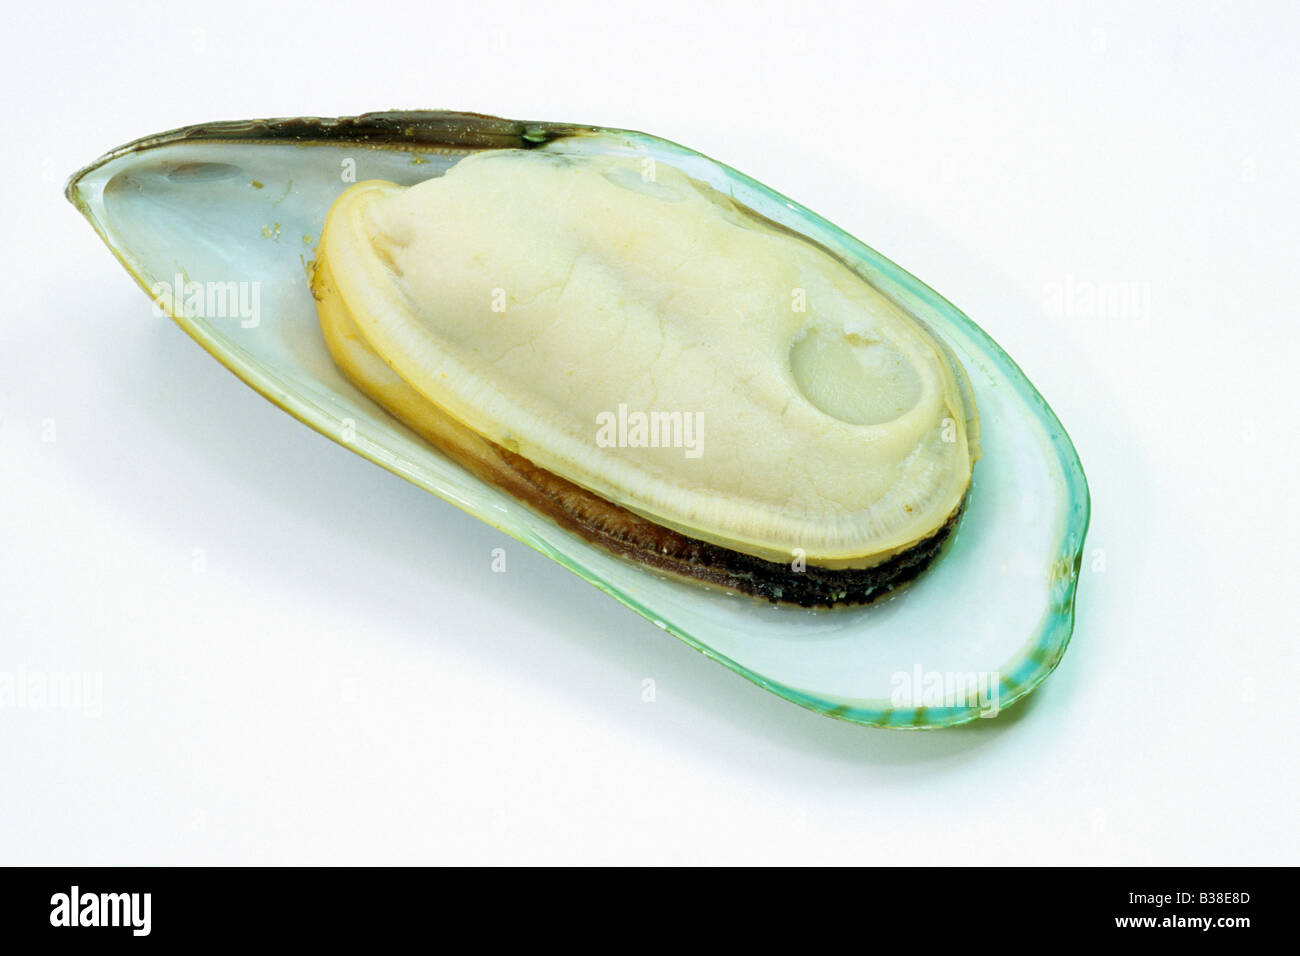 Greenshell Mussel, New Zealand Mussel, Channel Mussel (Perna canaliculus), opened, studio picture Stock Photo